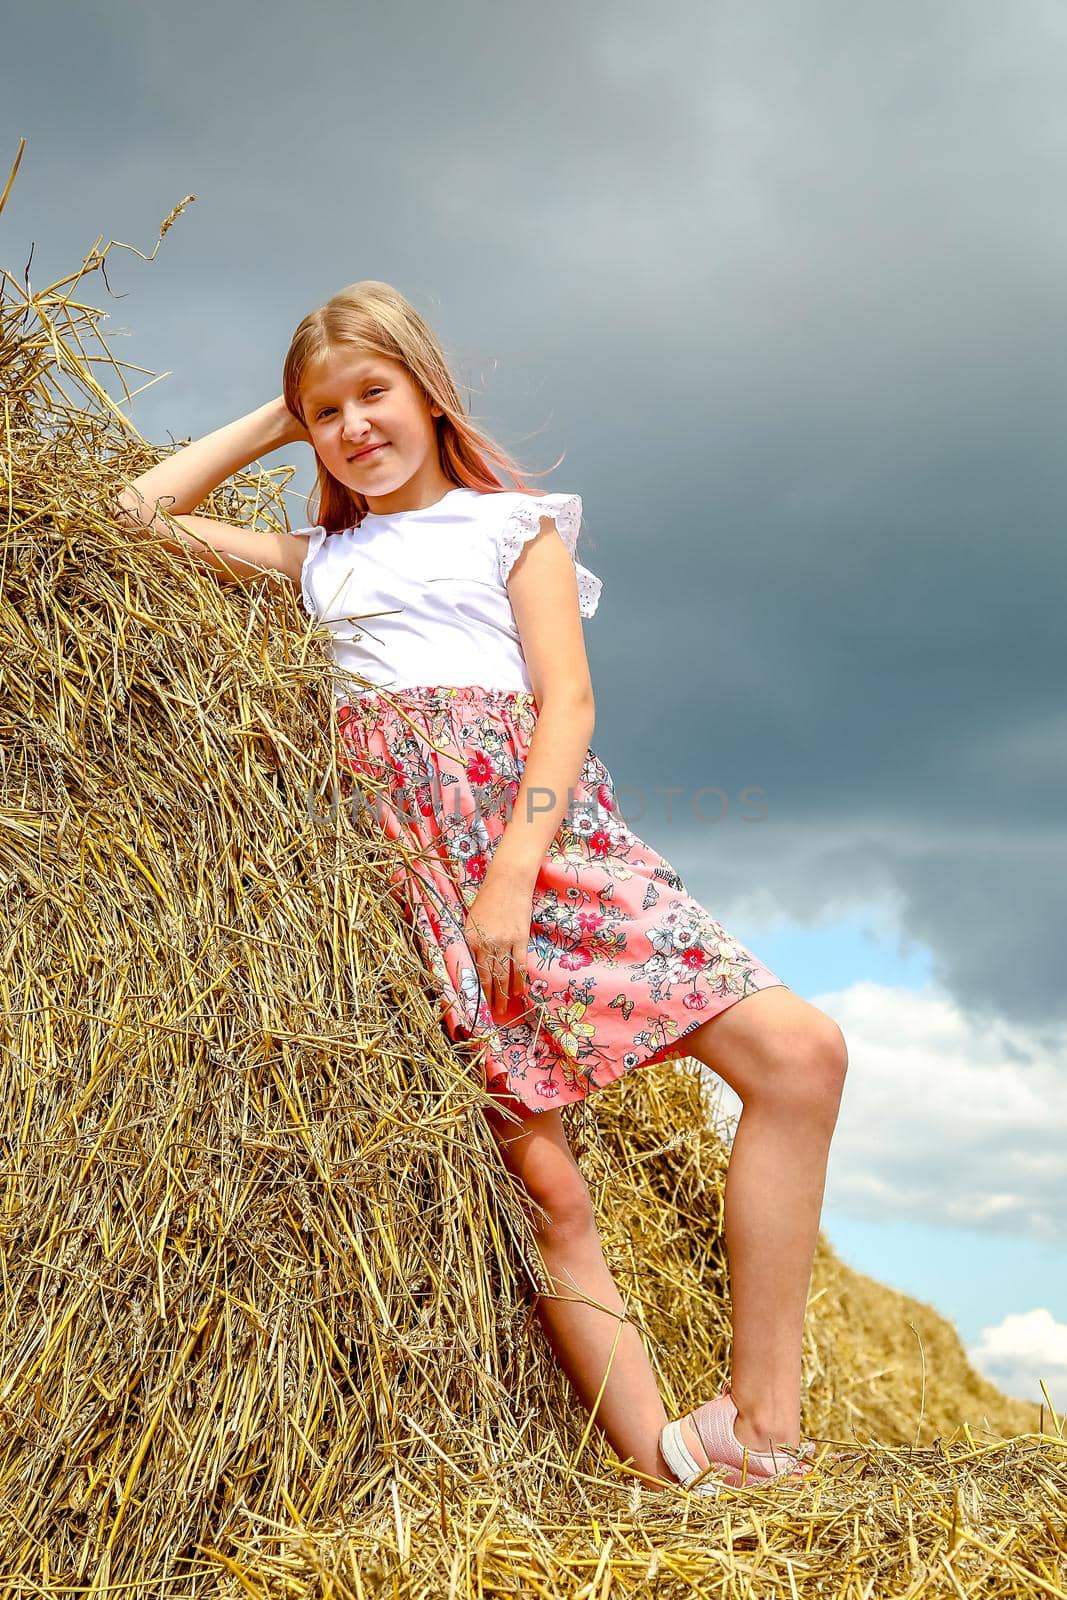 A beautiful blonde girl in a pink dress climbed on large bales of straw on a summer day